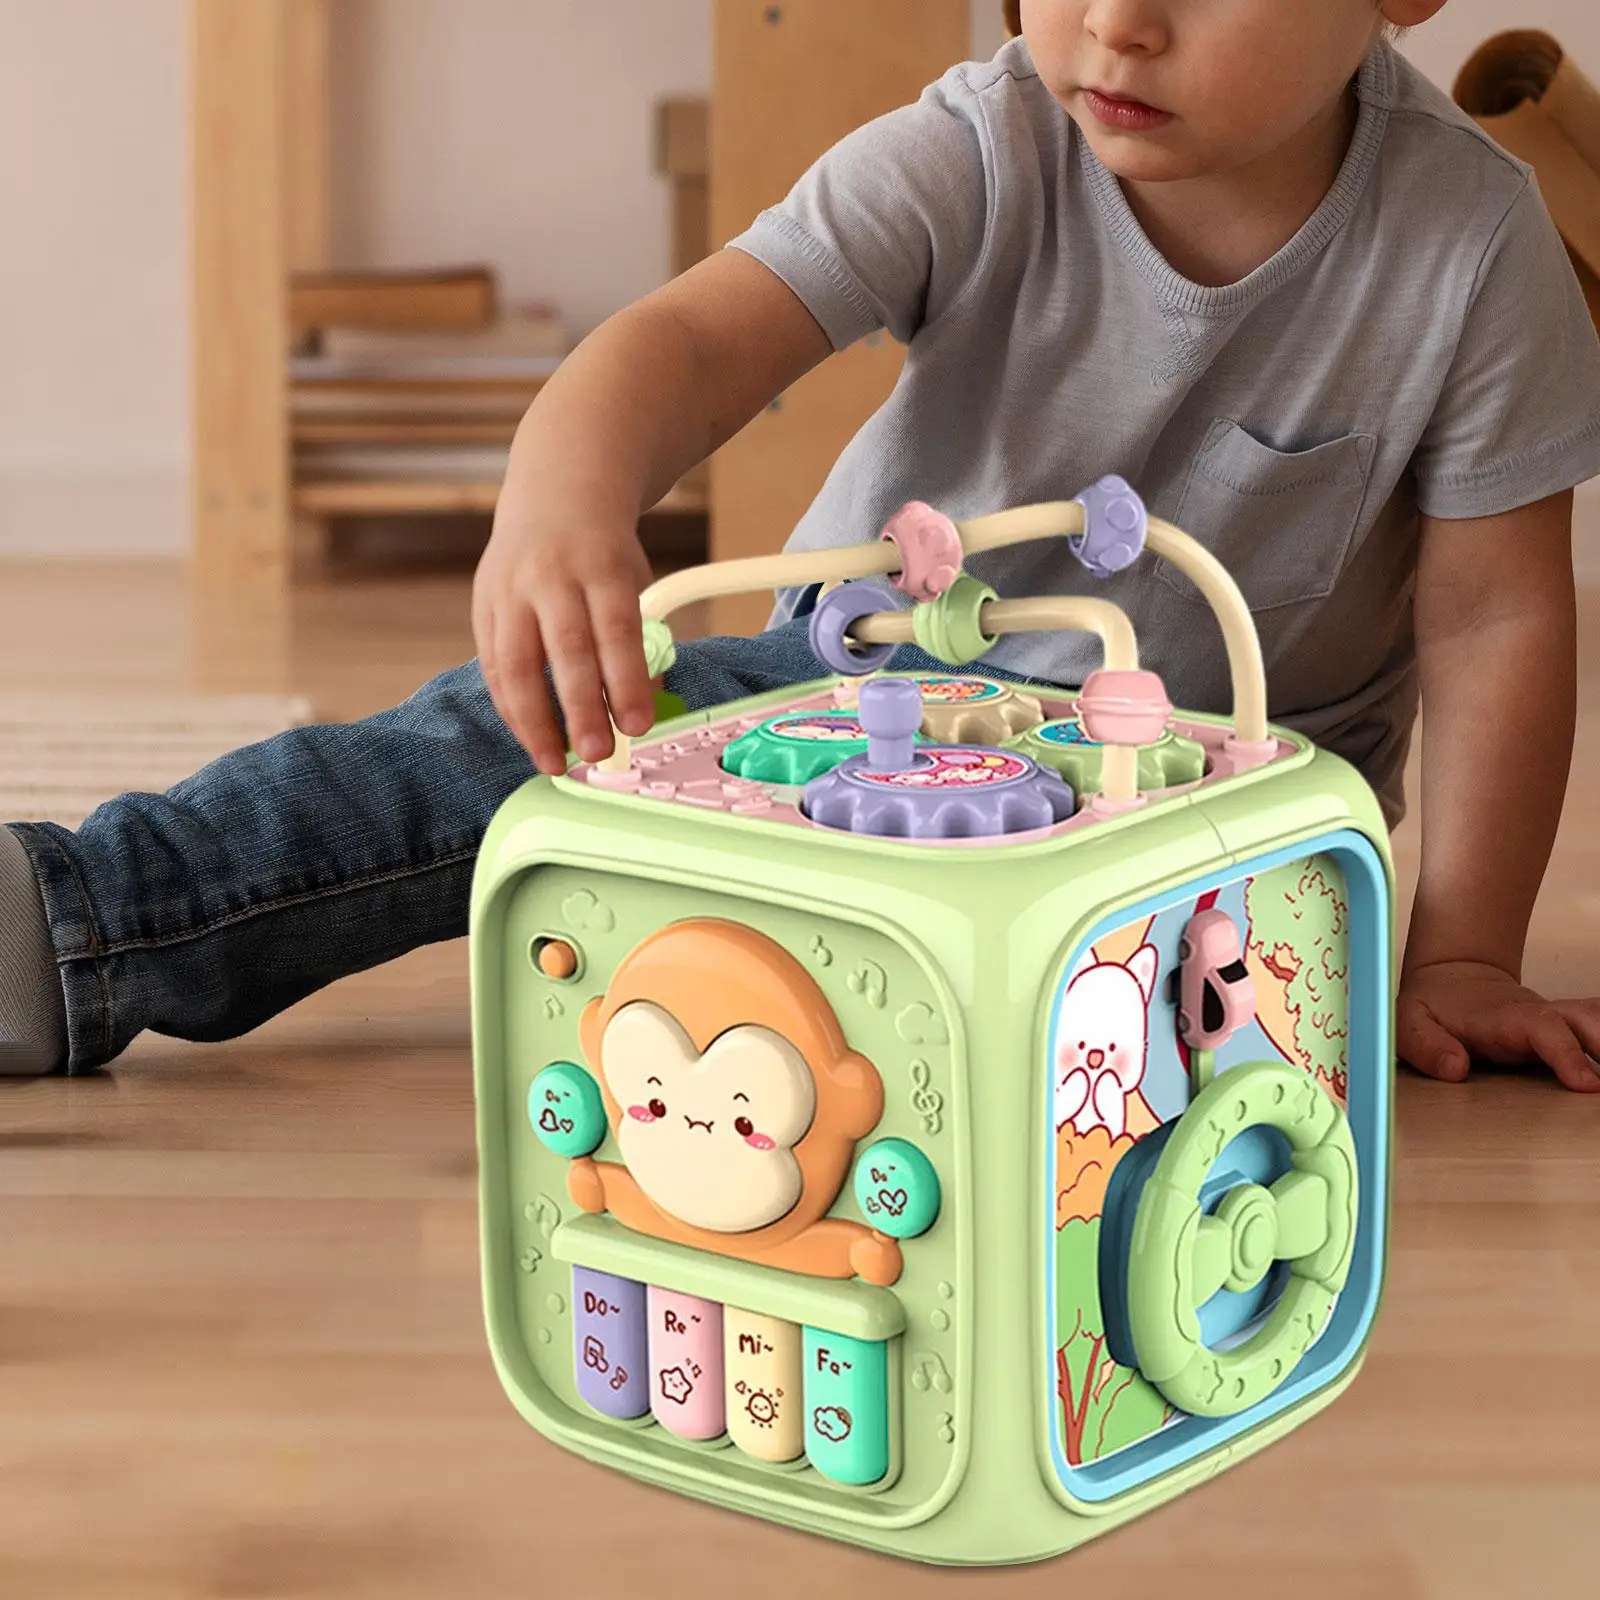 Baby Busy Cube Ball Learning Toy Portable Early Educational with Sound and Music for Travel Toy Infants Preschool Children Gifts